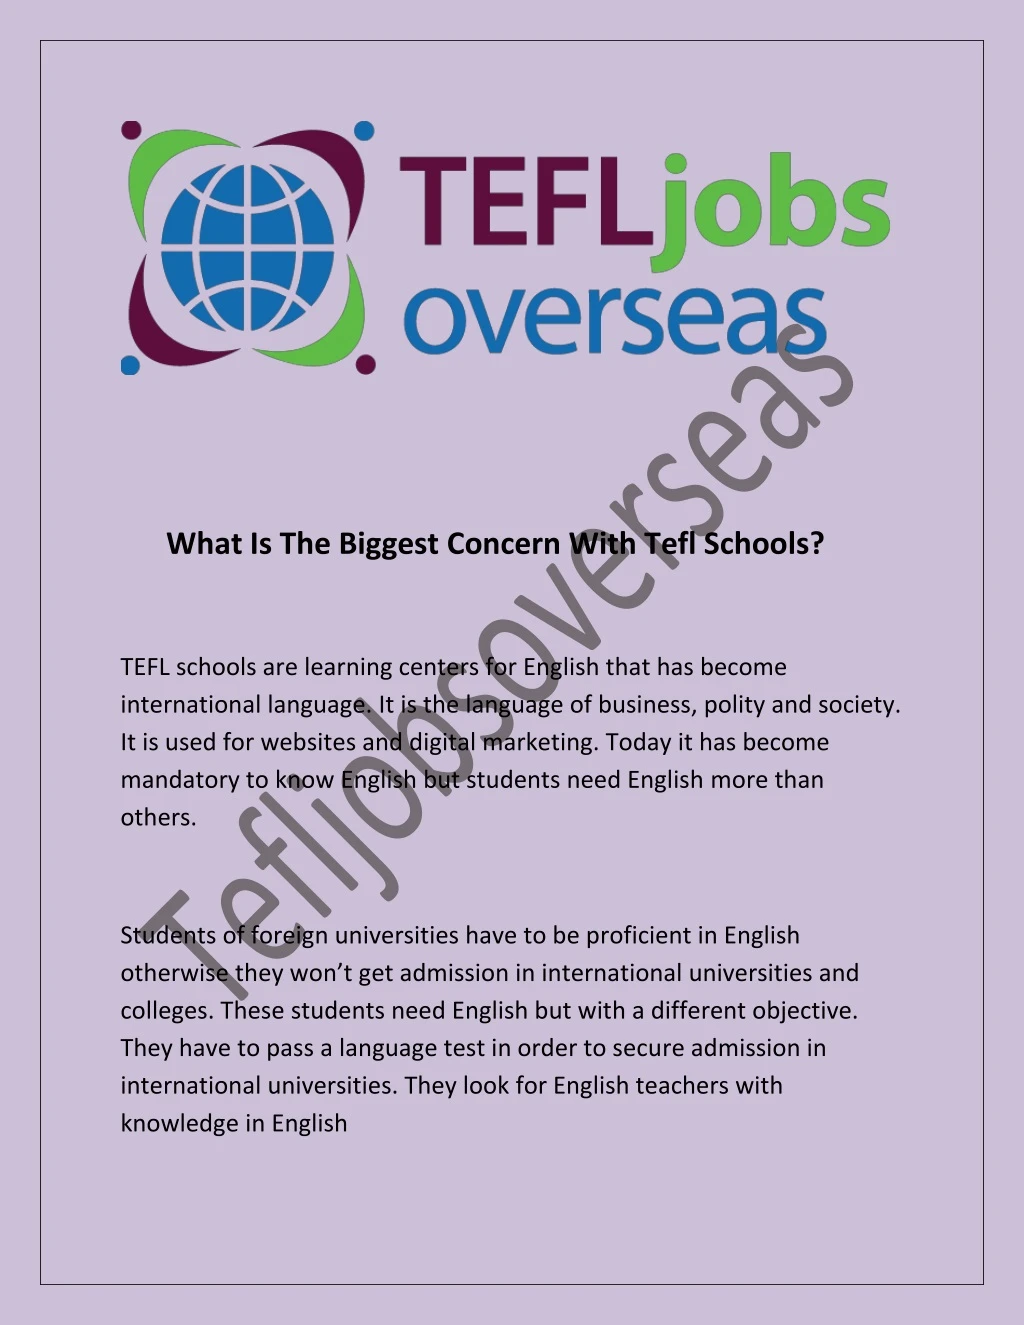 what is the biggest concern with tefl schools